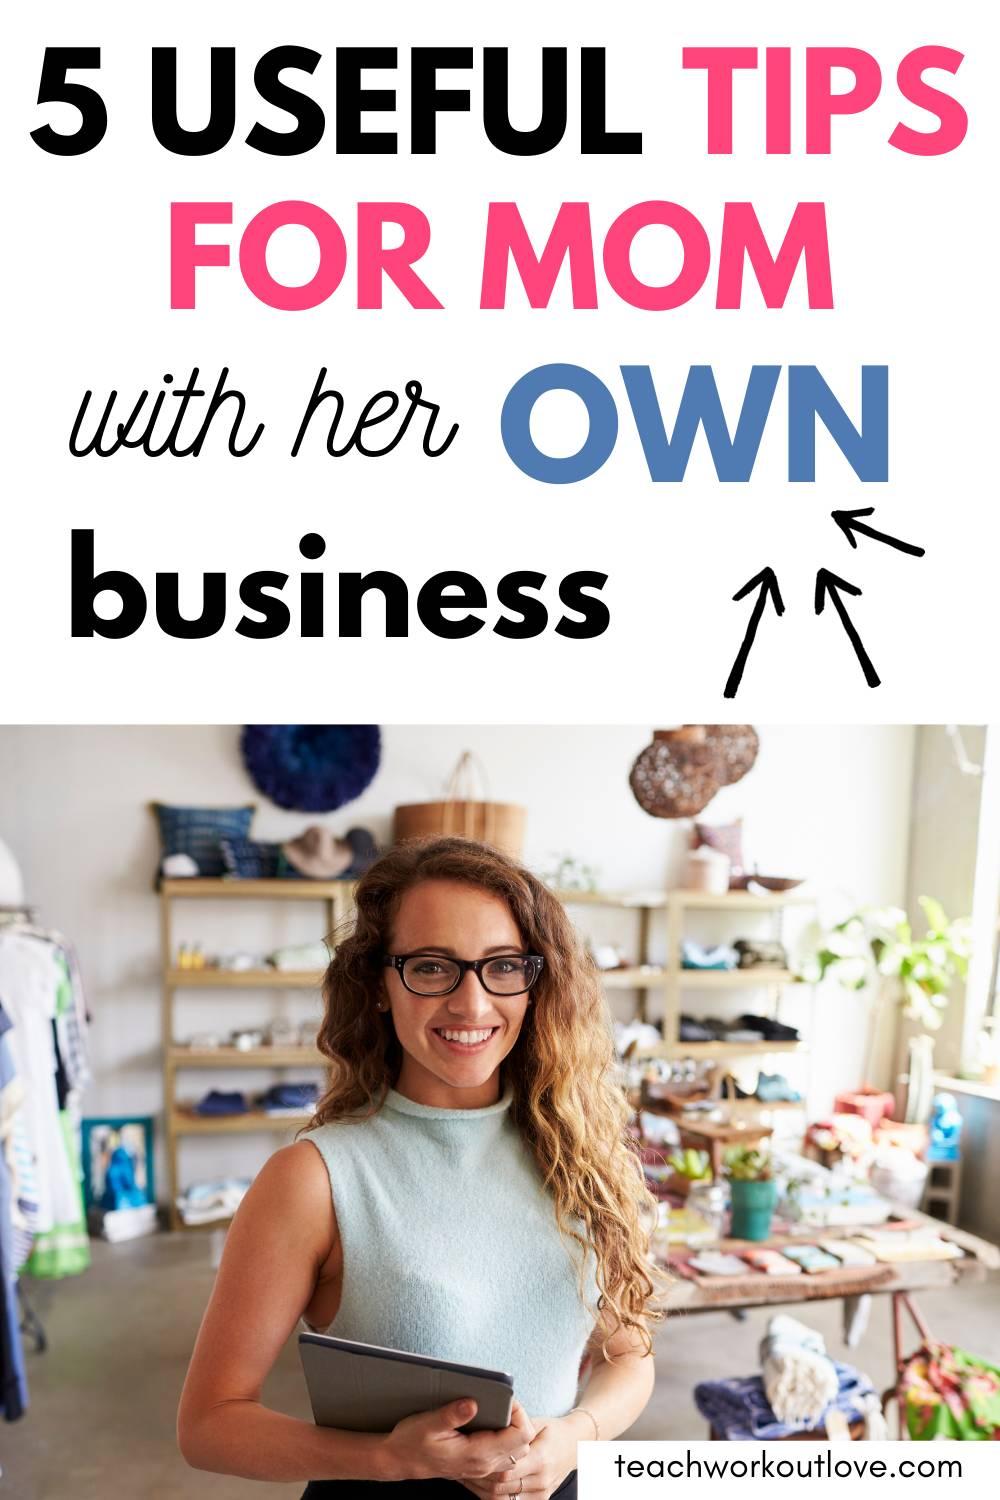 It’s not easy for the working mom to do it all especially if she is running her own business. Here's a few things for moms running their own business.